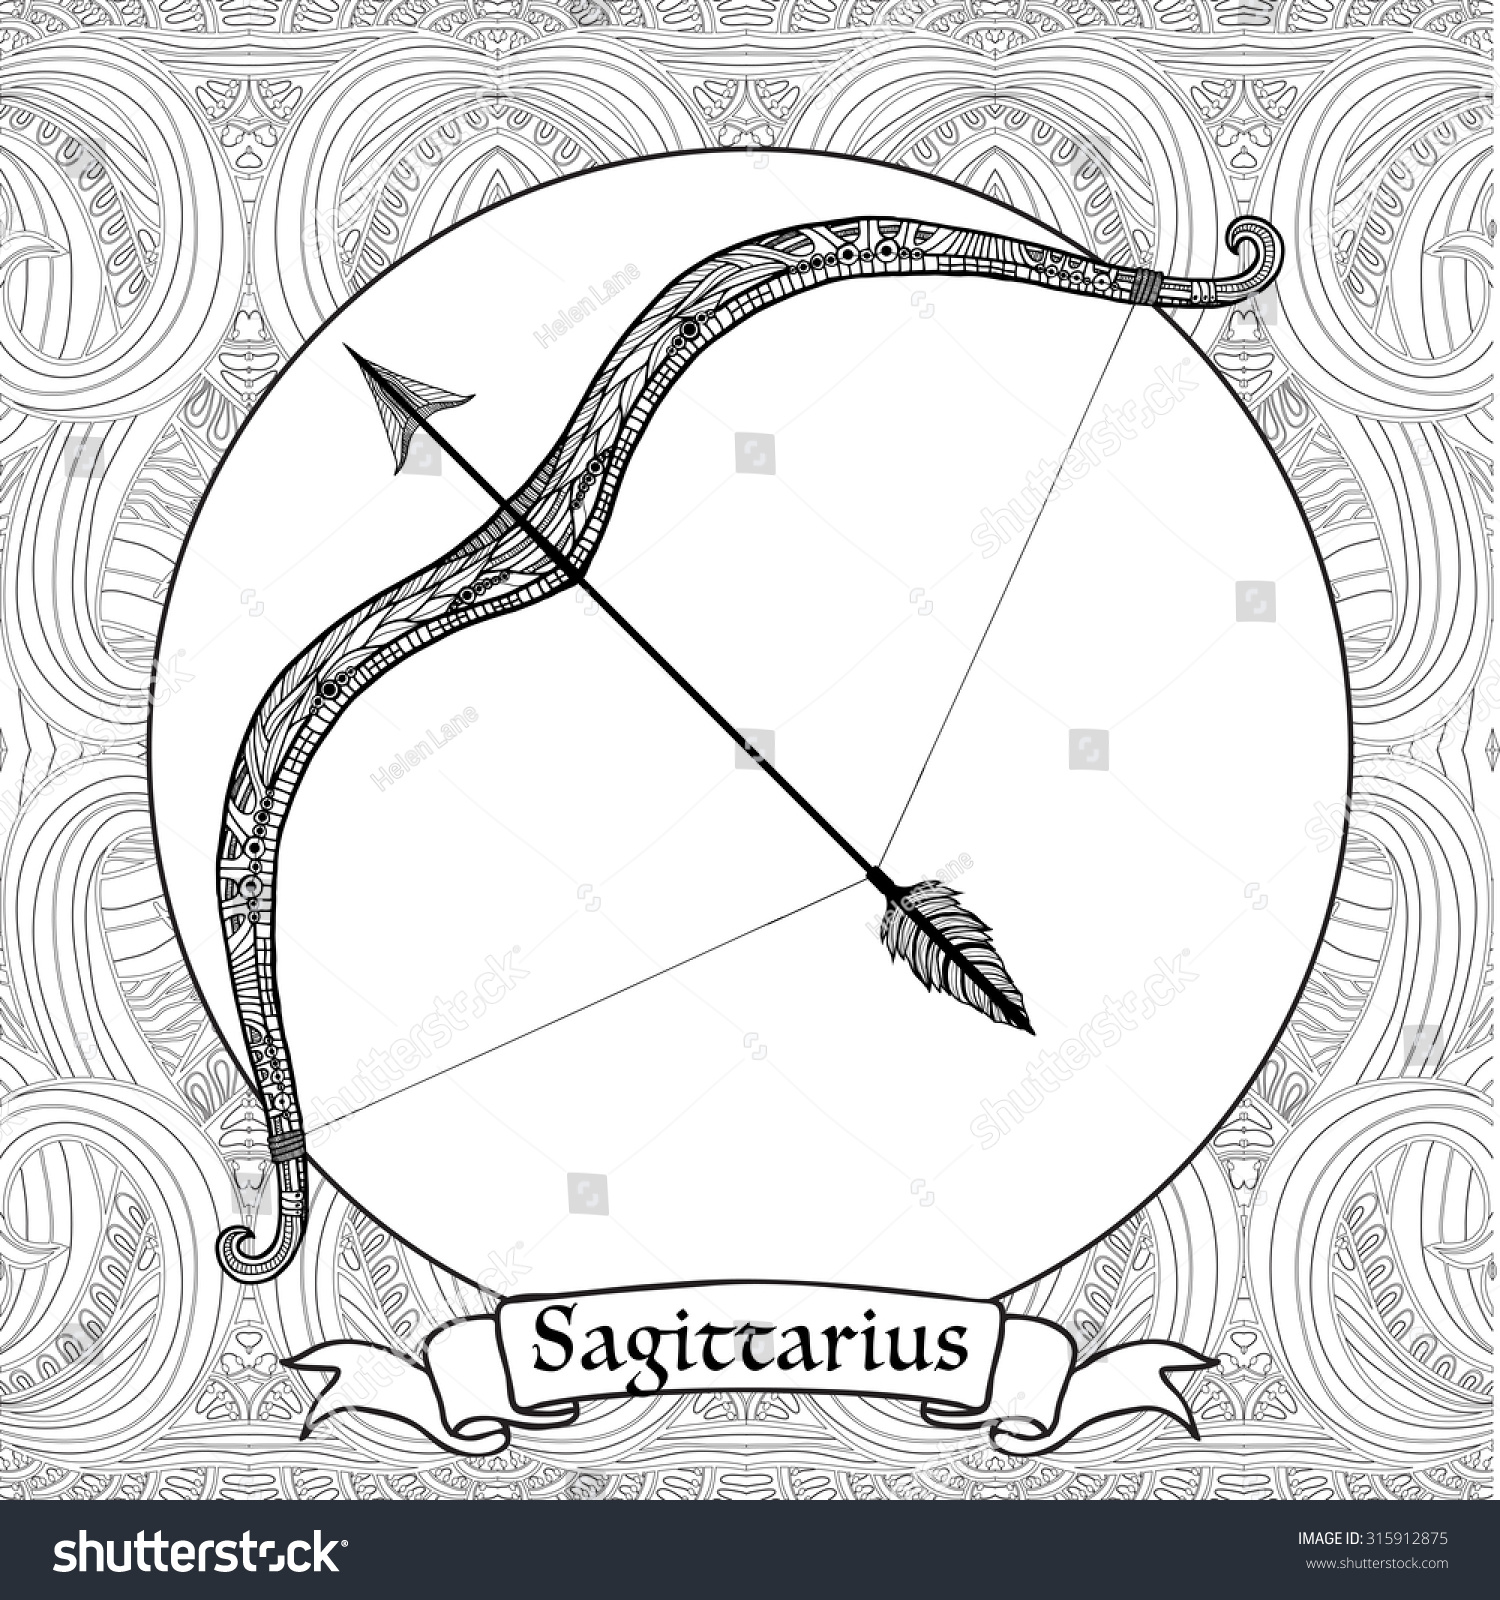 sagittarius coloring pages - photo #28